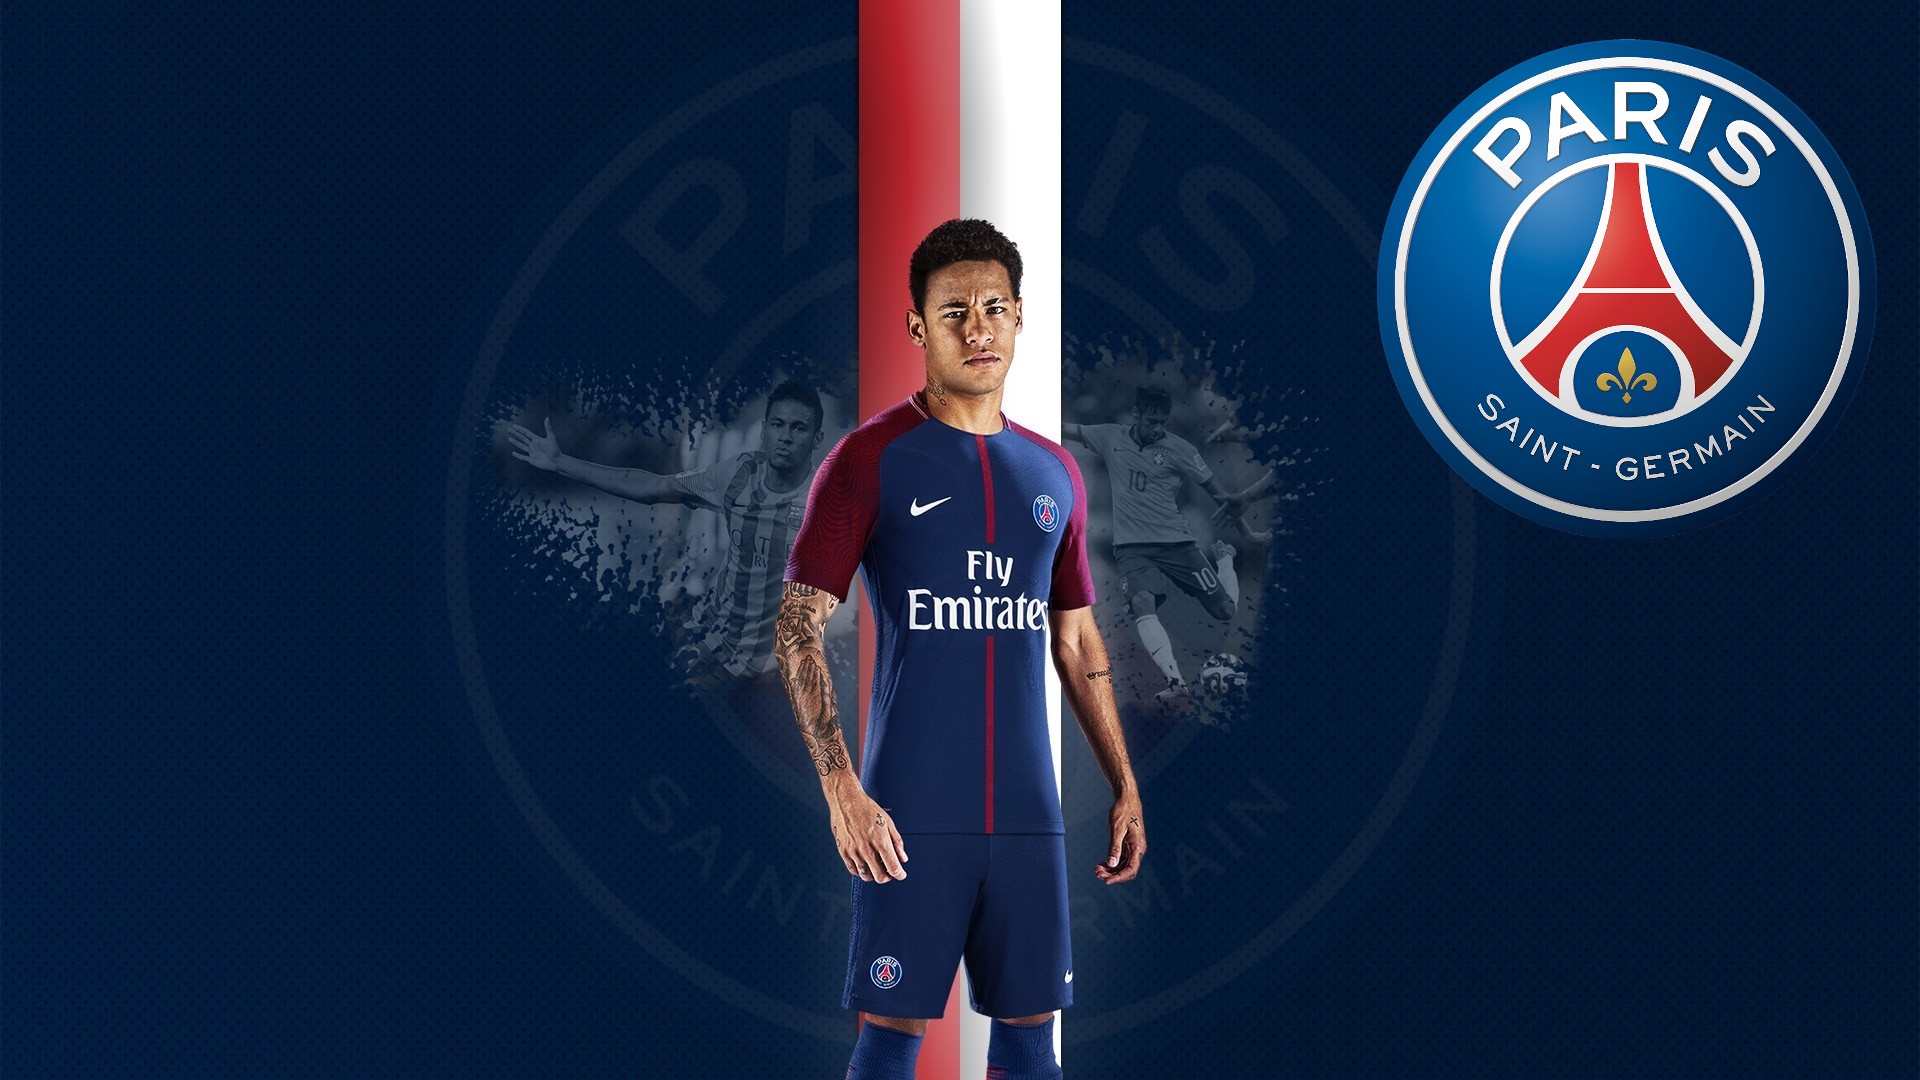 Neymar Paris Saint-Germain Desktop Wallpapers With Resolution 1920X1080 pixel. You can make this wallpaper for your Mac or Windows Desktop Background, iPhone, Android or Tablet and another Smartphone device for free